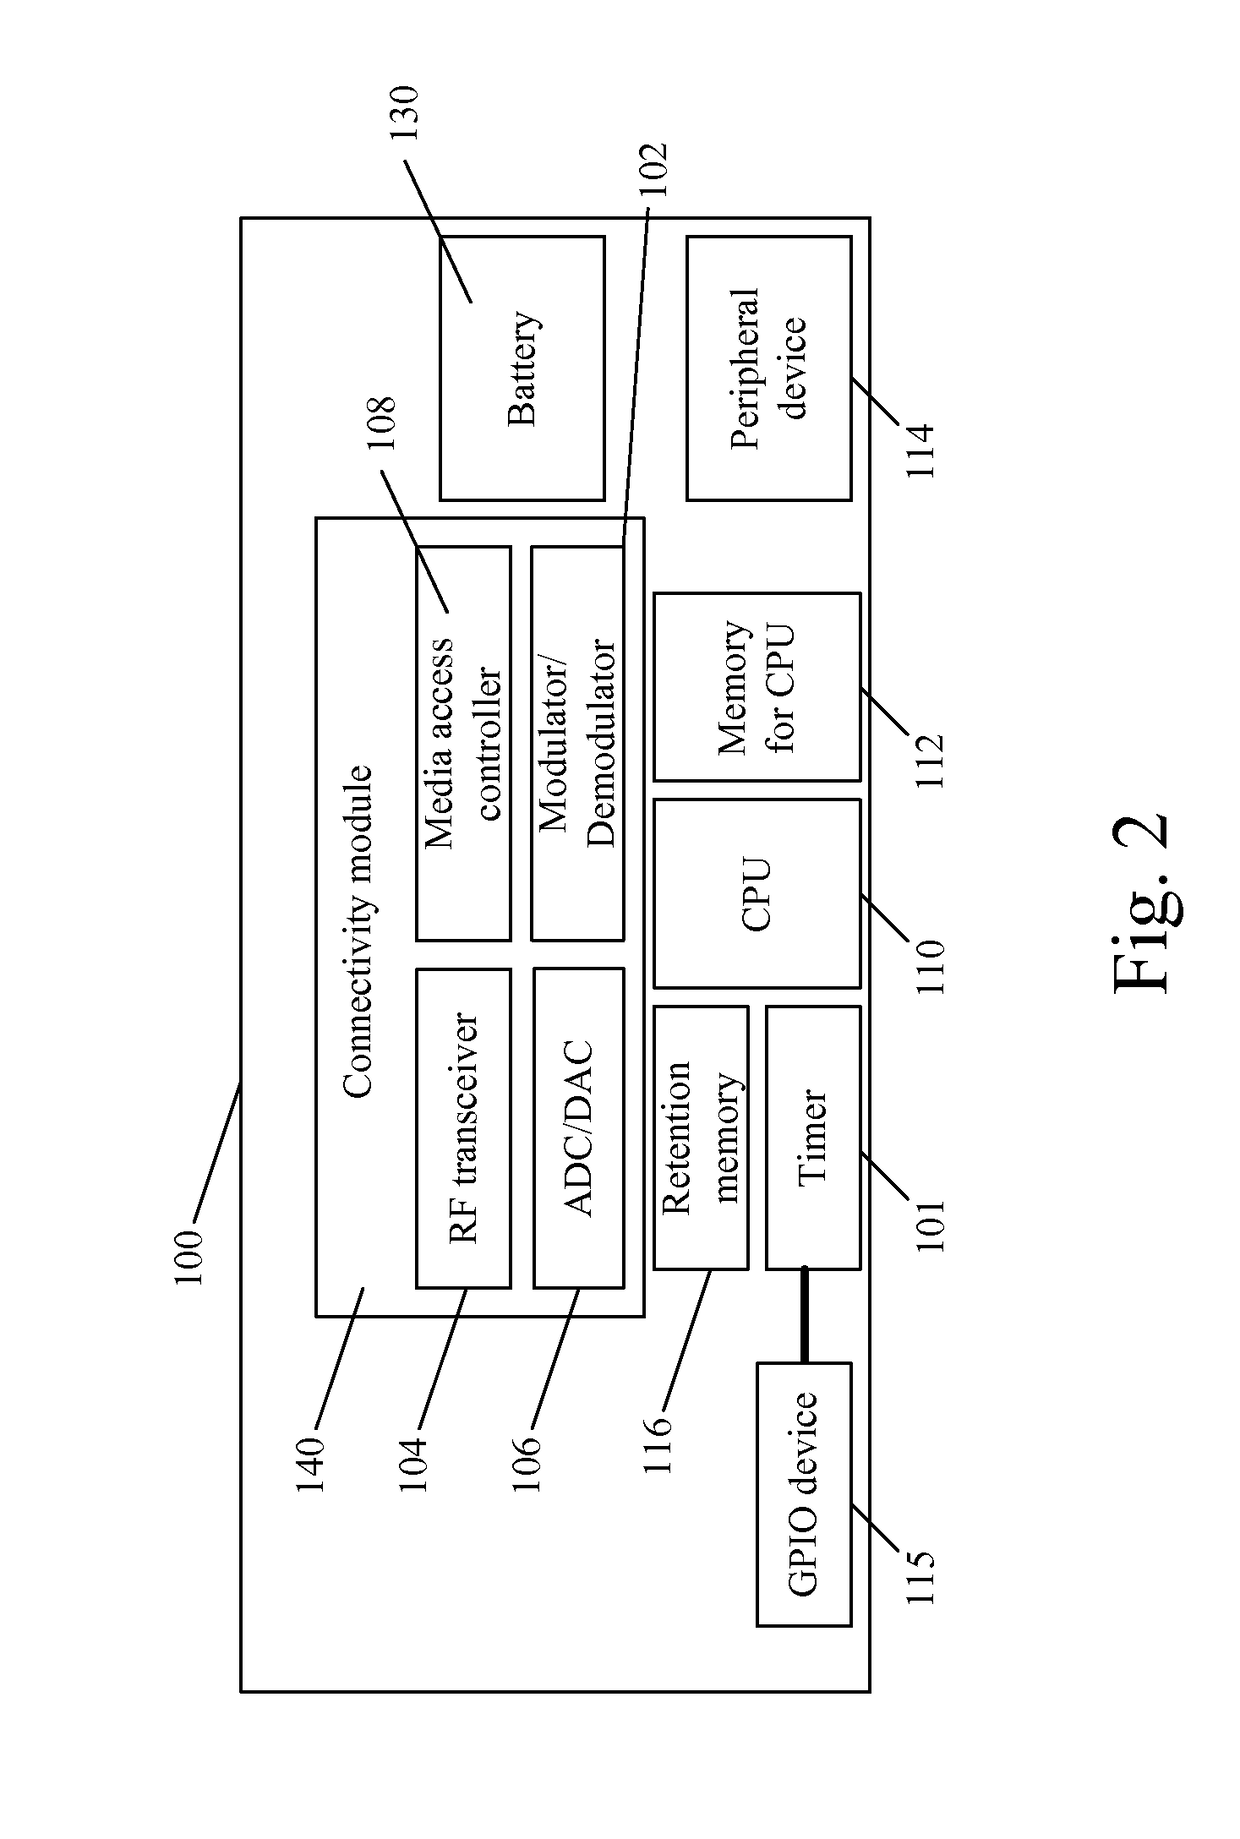 Method of saving power of station in wireless network